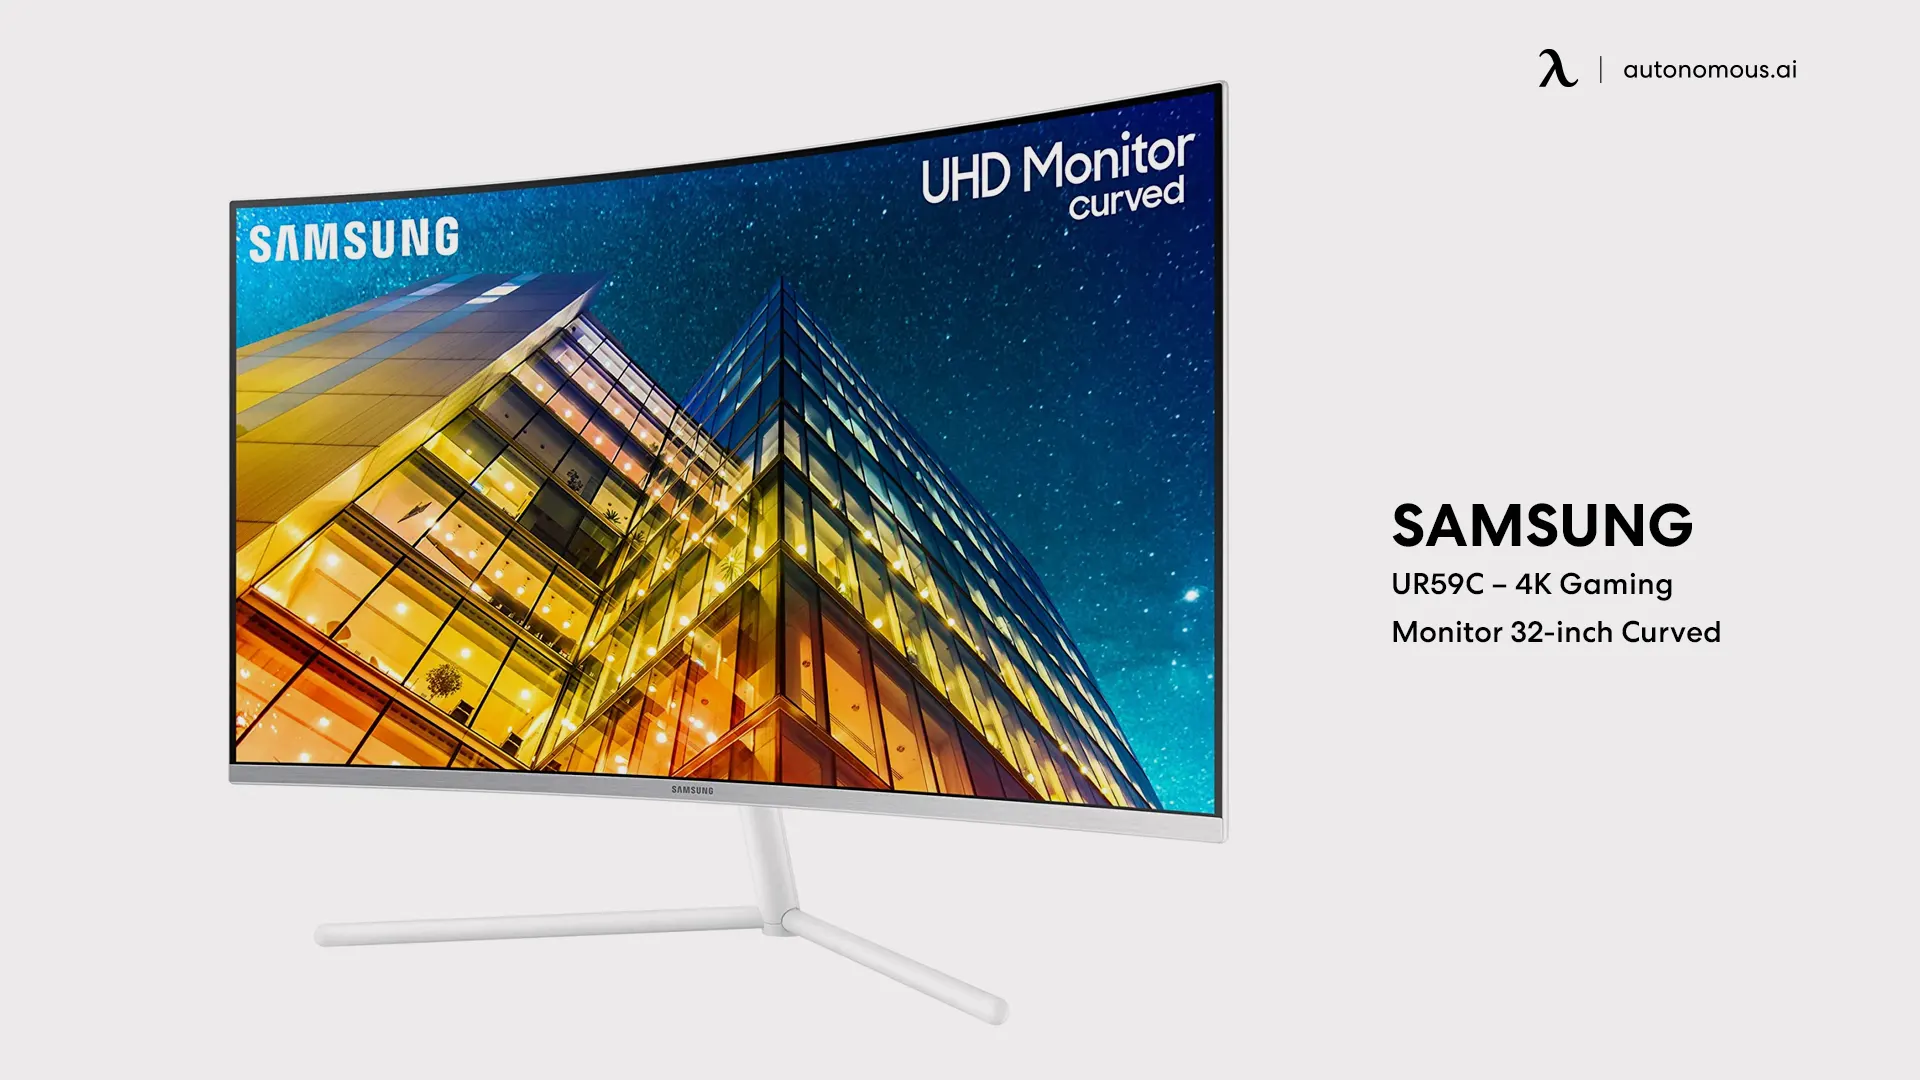 SAMSUNG UR59C – 4K Gaming Monitor 32-inch Curved